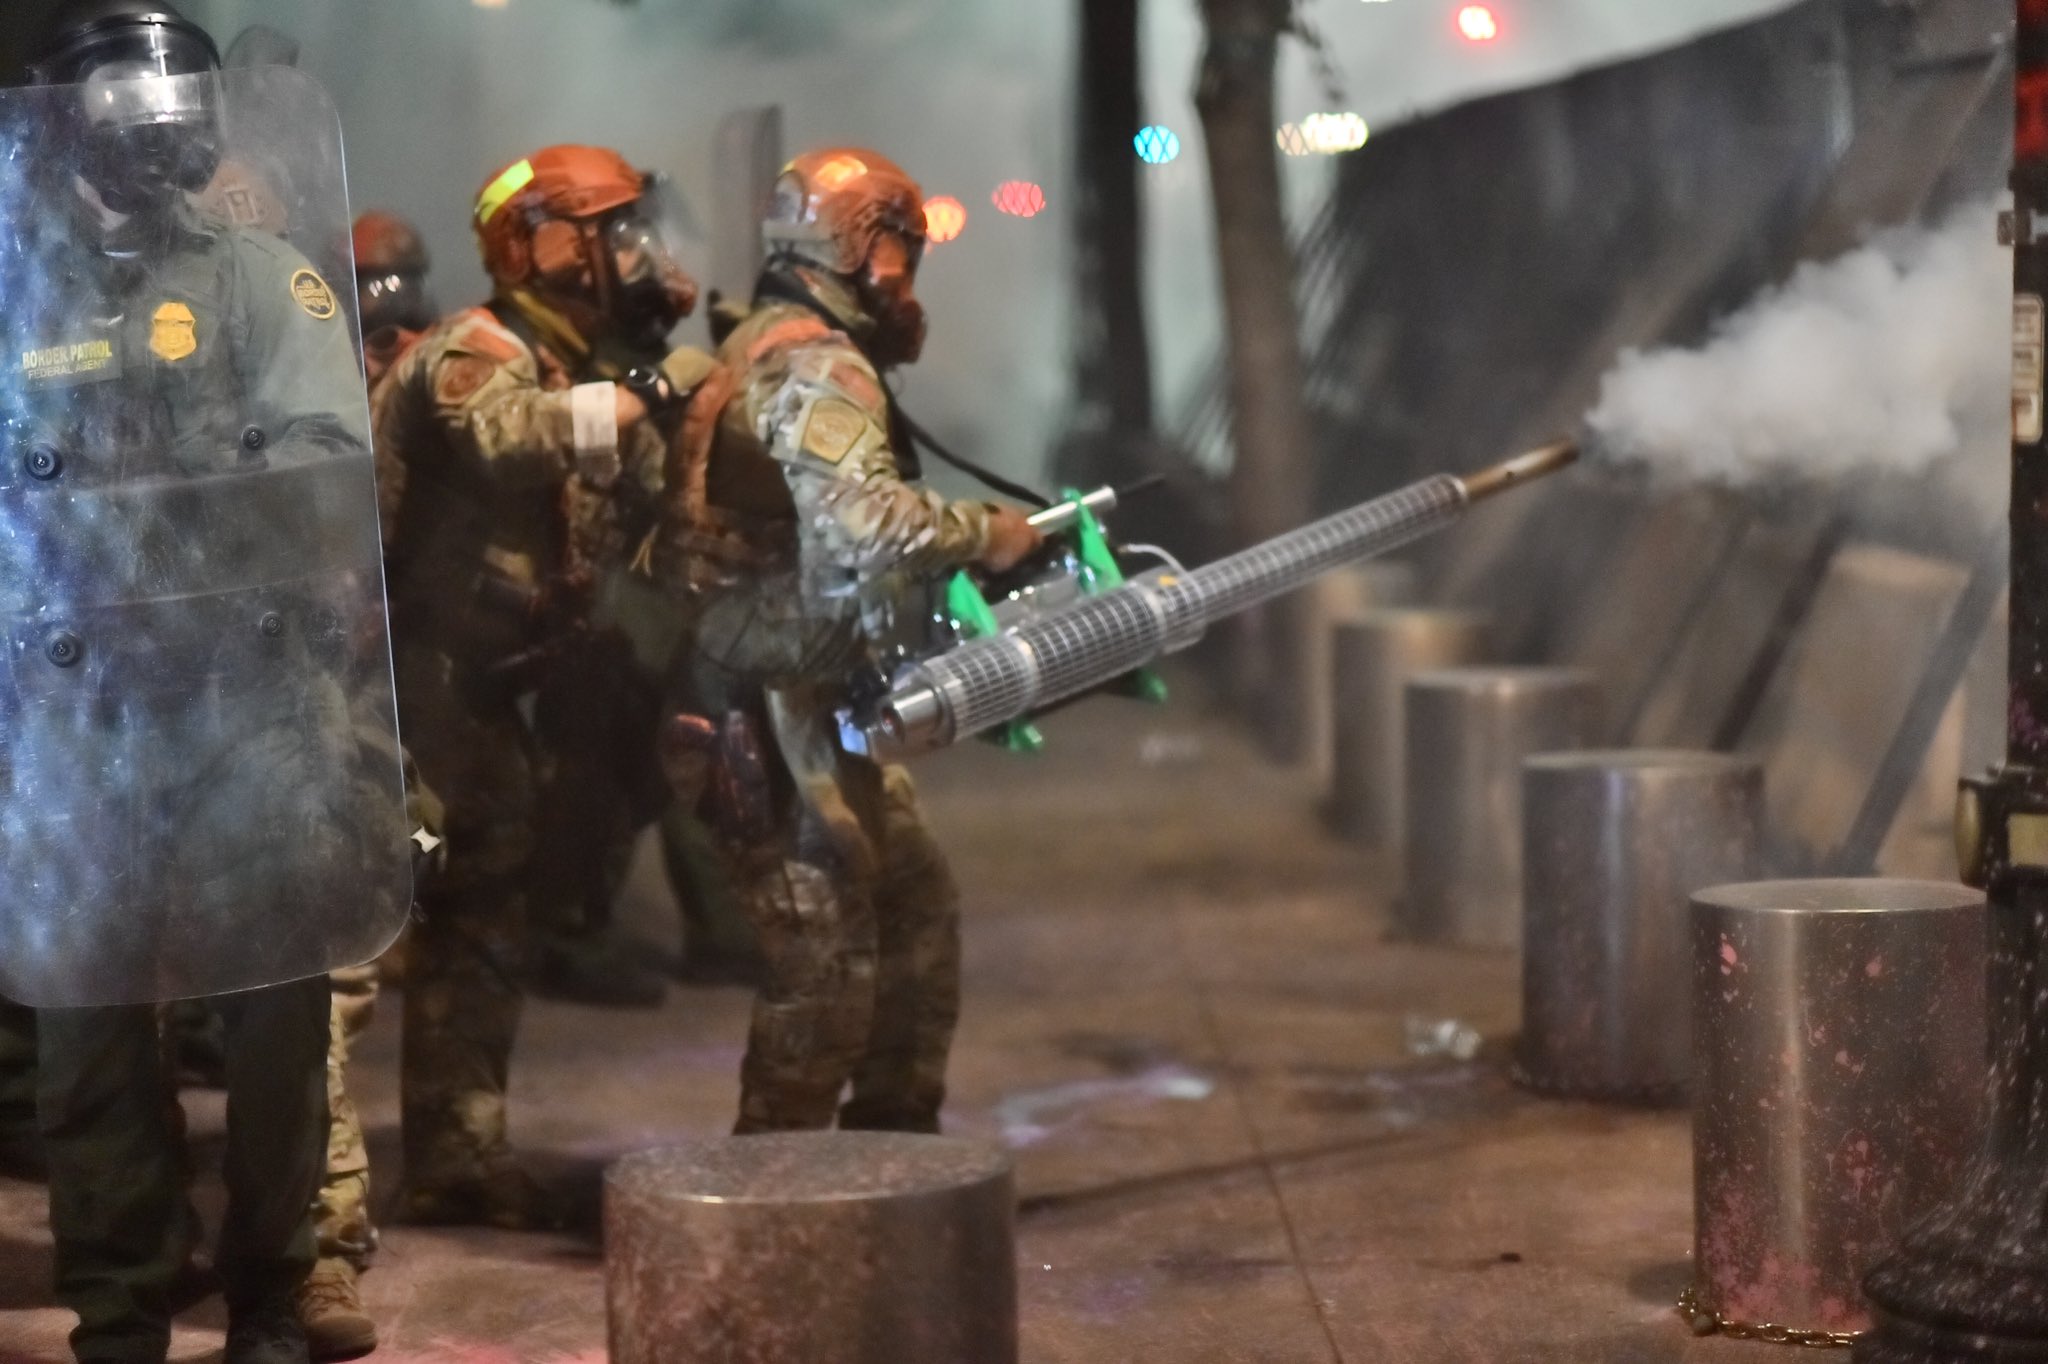 Fully riot-geared and for some reason in green camo US Homeland Security agents (to the middle and the left of the photo) behind a row of two-foot tall, one-foot radius metal posts, behind a metal grate wall over 7 feet tall with metal support beams and concrete pylon buttressing. In the front of the left side is an agent holding a plastic clear riot shield, through which you can see a patch that say 'Border Patrol Federal Agent' in yellow and some insignia patches as well. In the middle are the agents in camo, one with a hand on the shoulder of another who is operating a thermal fogger machine shooting gas through the fence. The machine is maybe four or five feet long and has a body not unlike a bush whacker with a two-cycle engine, but fueling a vaporizer instead of a rotor. The agent is holding the machine with their right hand visibly and there is a black strap across their shoulder holding it up. The machine is mostly shiny metal, although the tip is showing signs of corrosion (no surprise based on the compounds and heat) and the supports of the body are a bright green